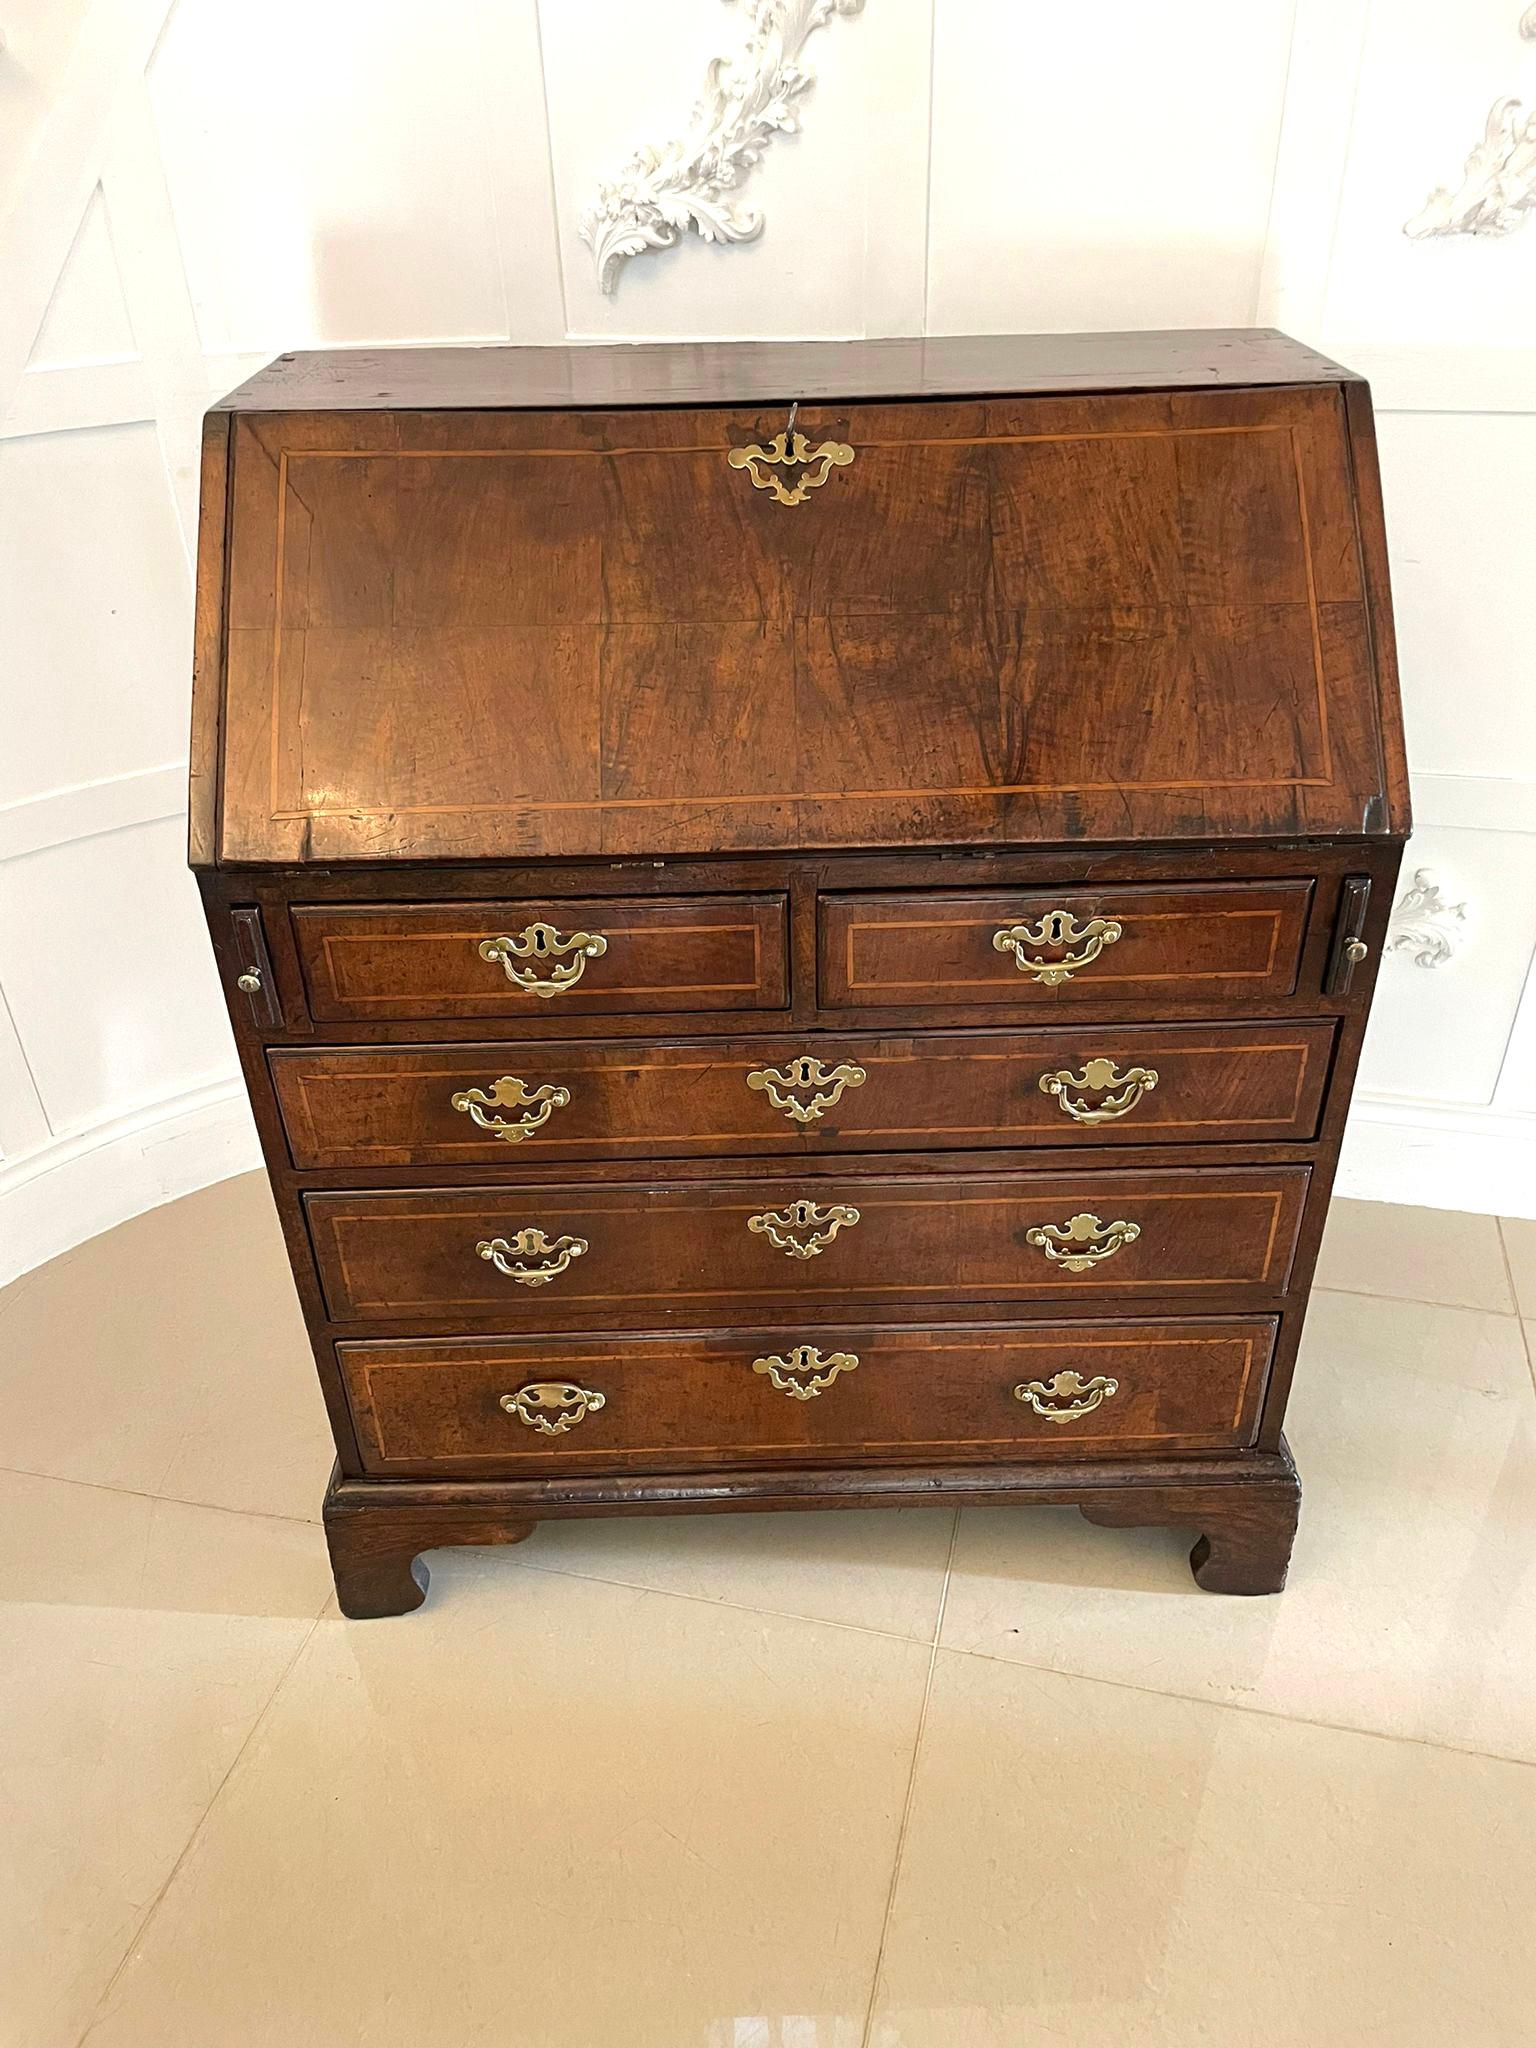 Fine quality antique George I figured walnut bureau with original handles having a fine quality figured walnut bureau with walnut inlay stringing, 2 short and 3 long oak lined drawers with original brass handles and escutcheons, fitted interior